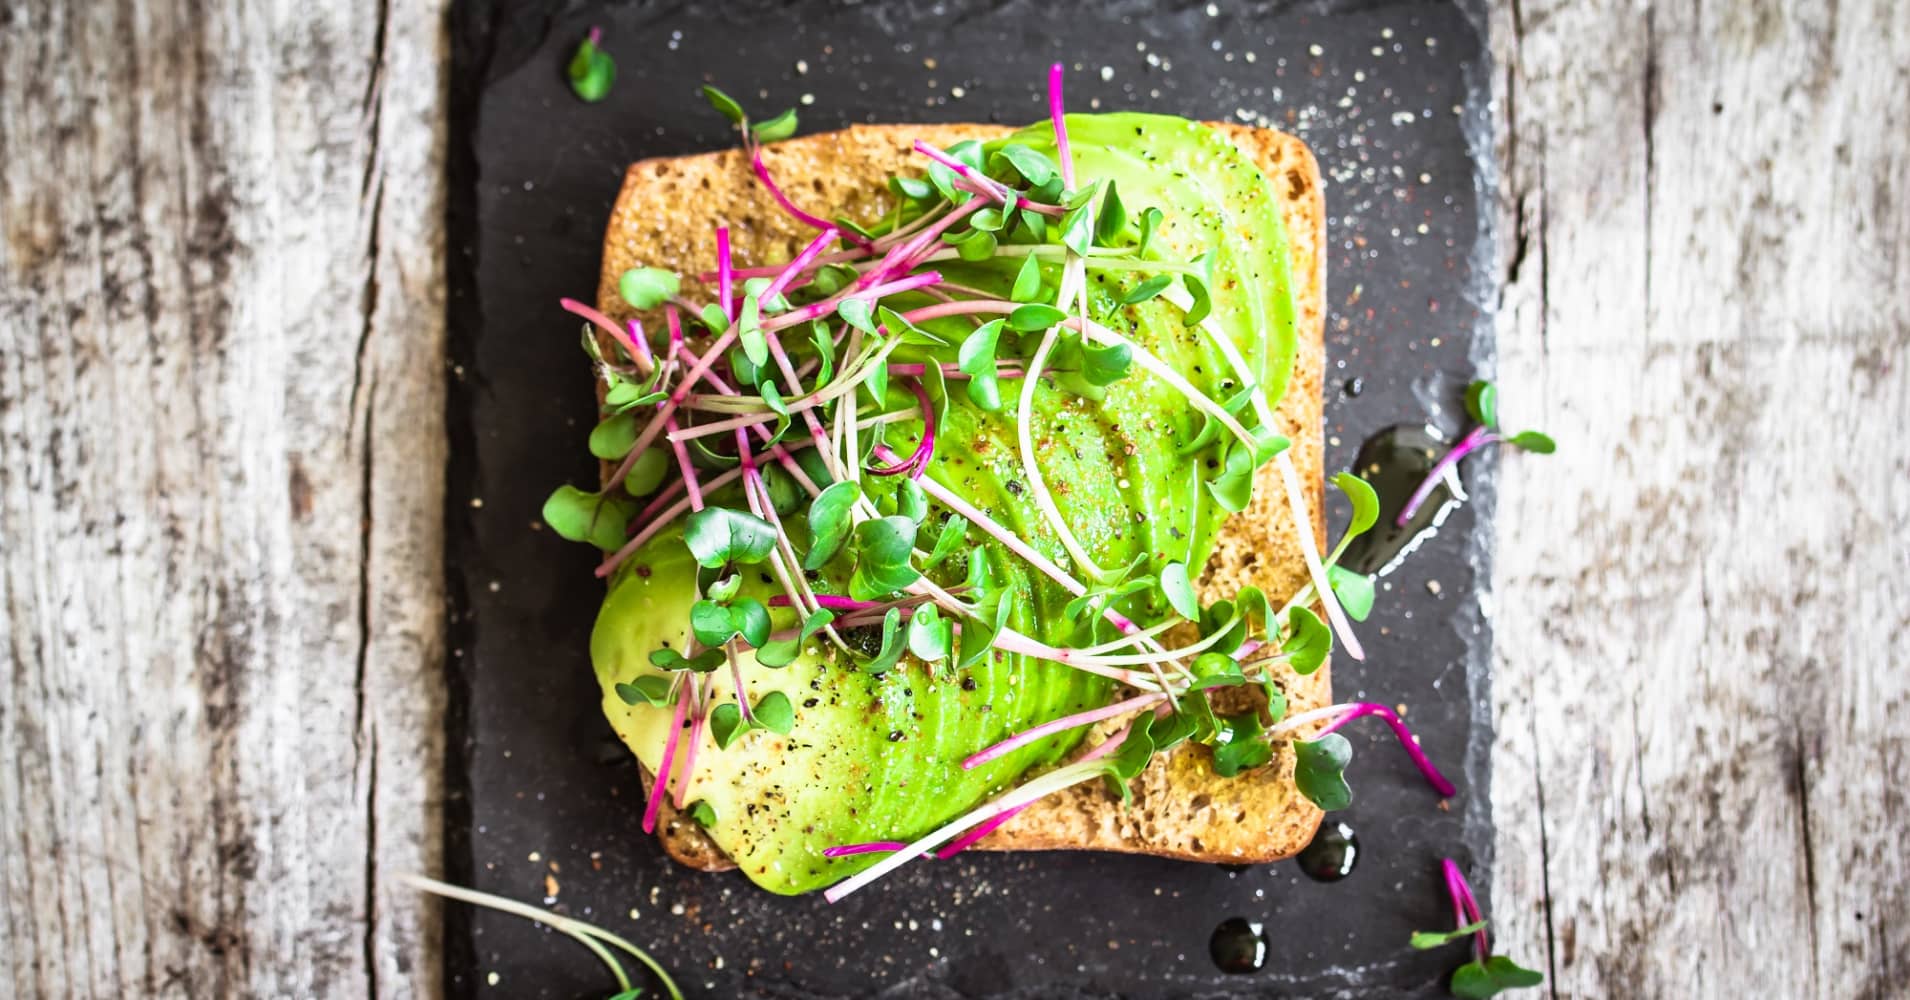 Americans spend $900,000 a month on avocado toast